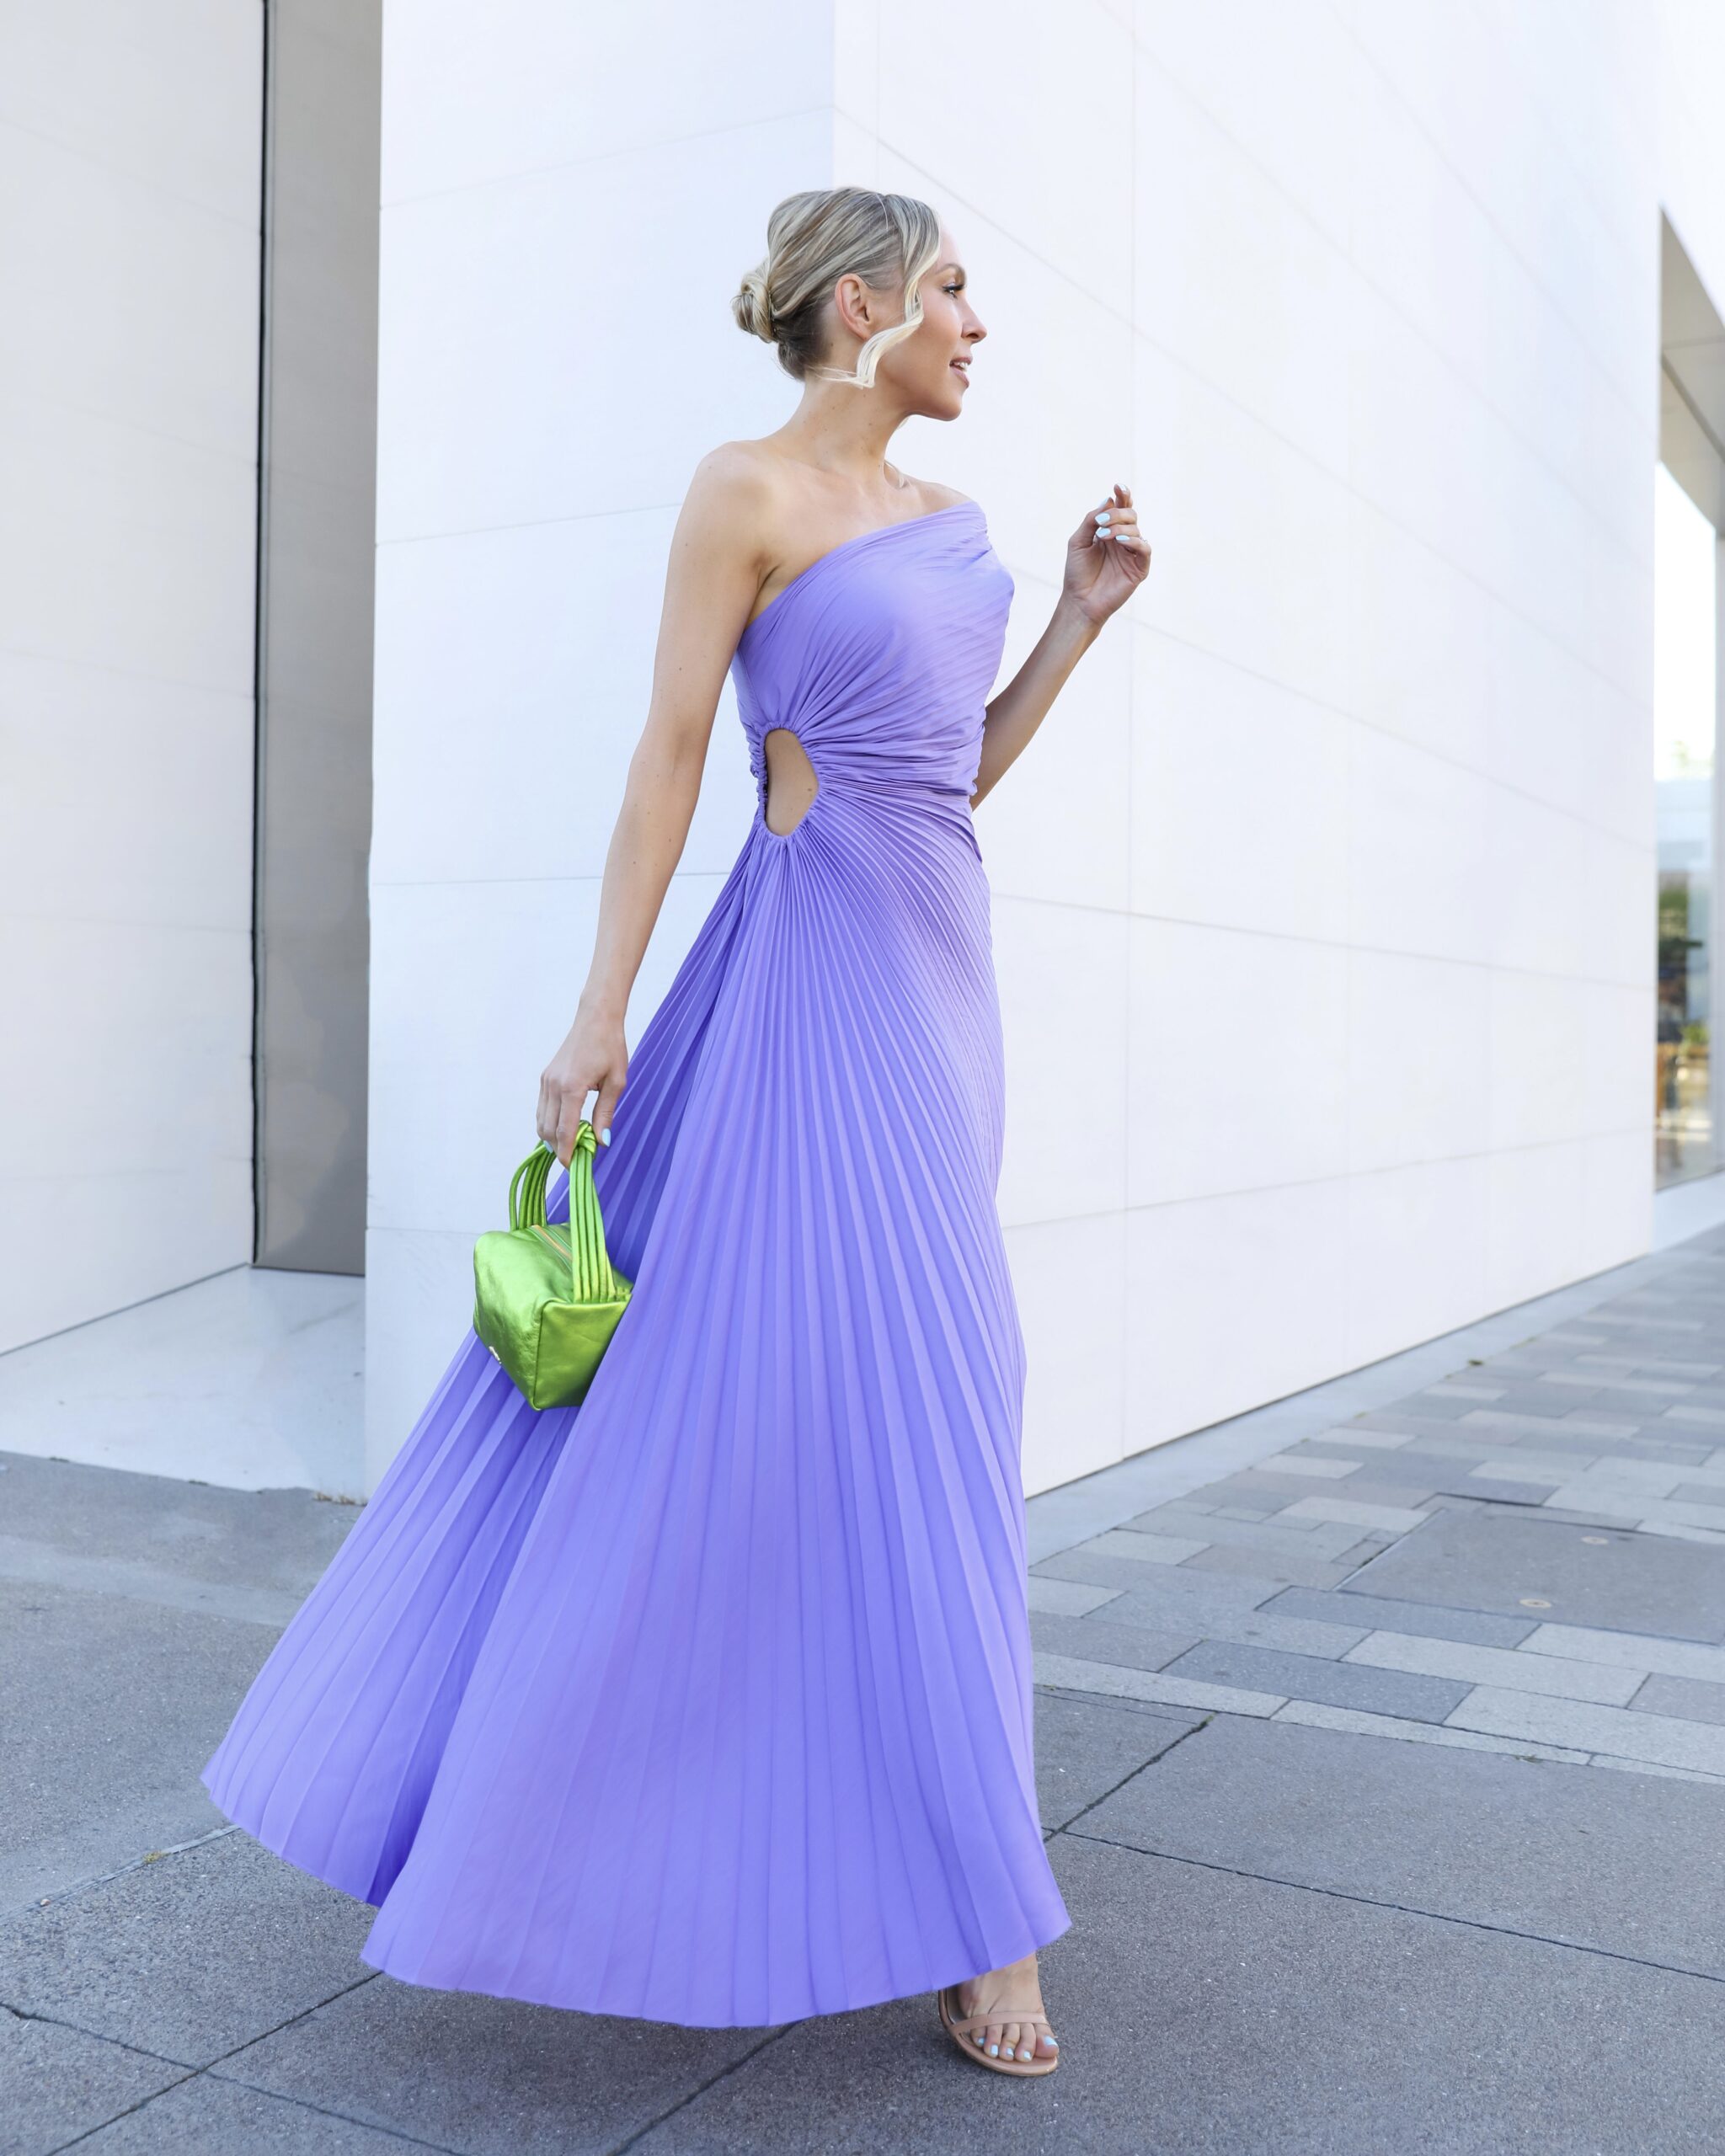 Lilac pleated purple cut out dress, saks. wedding guest style